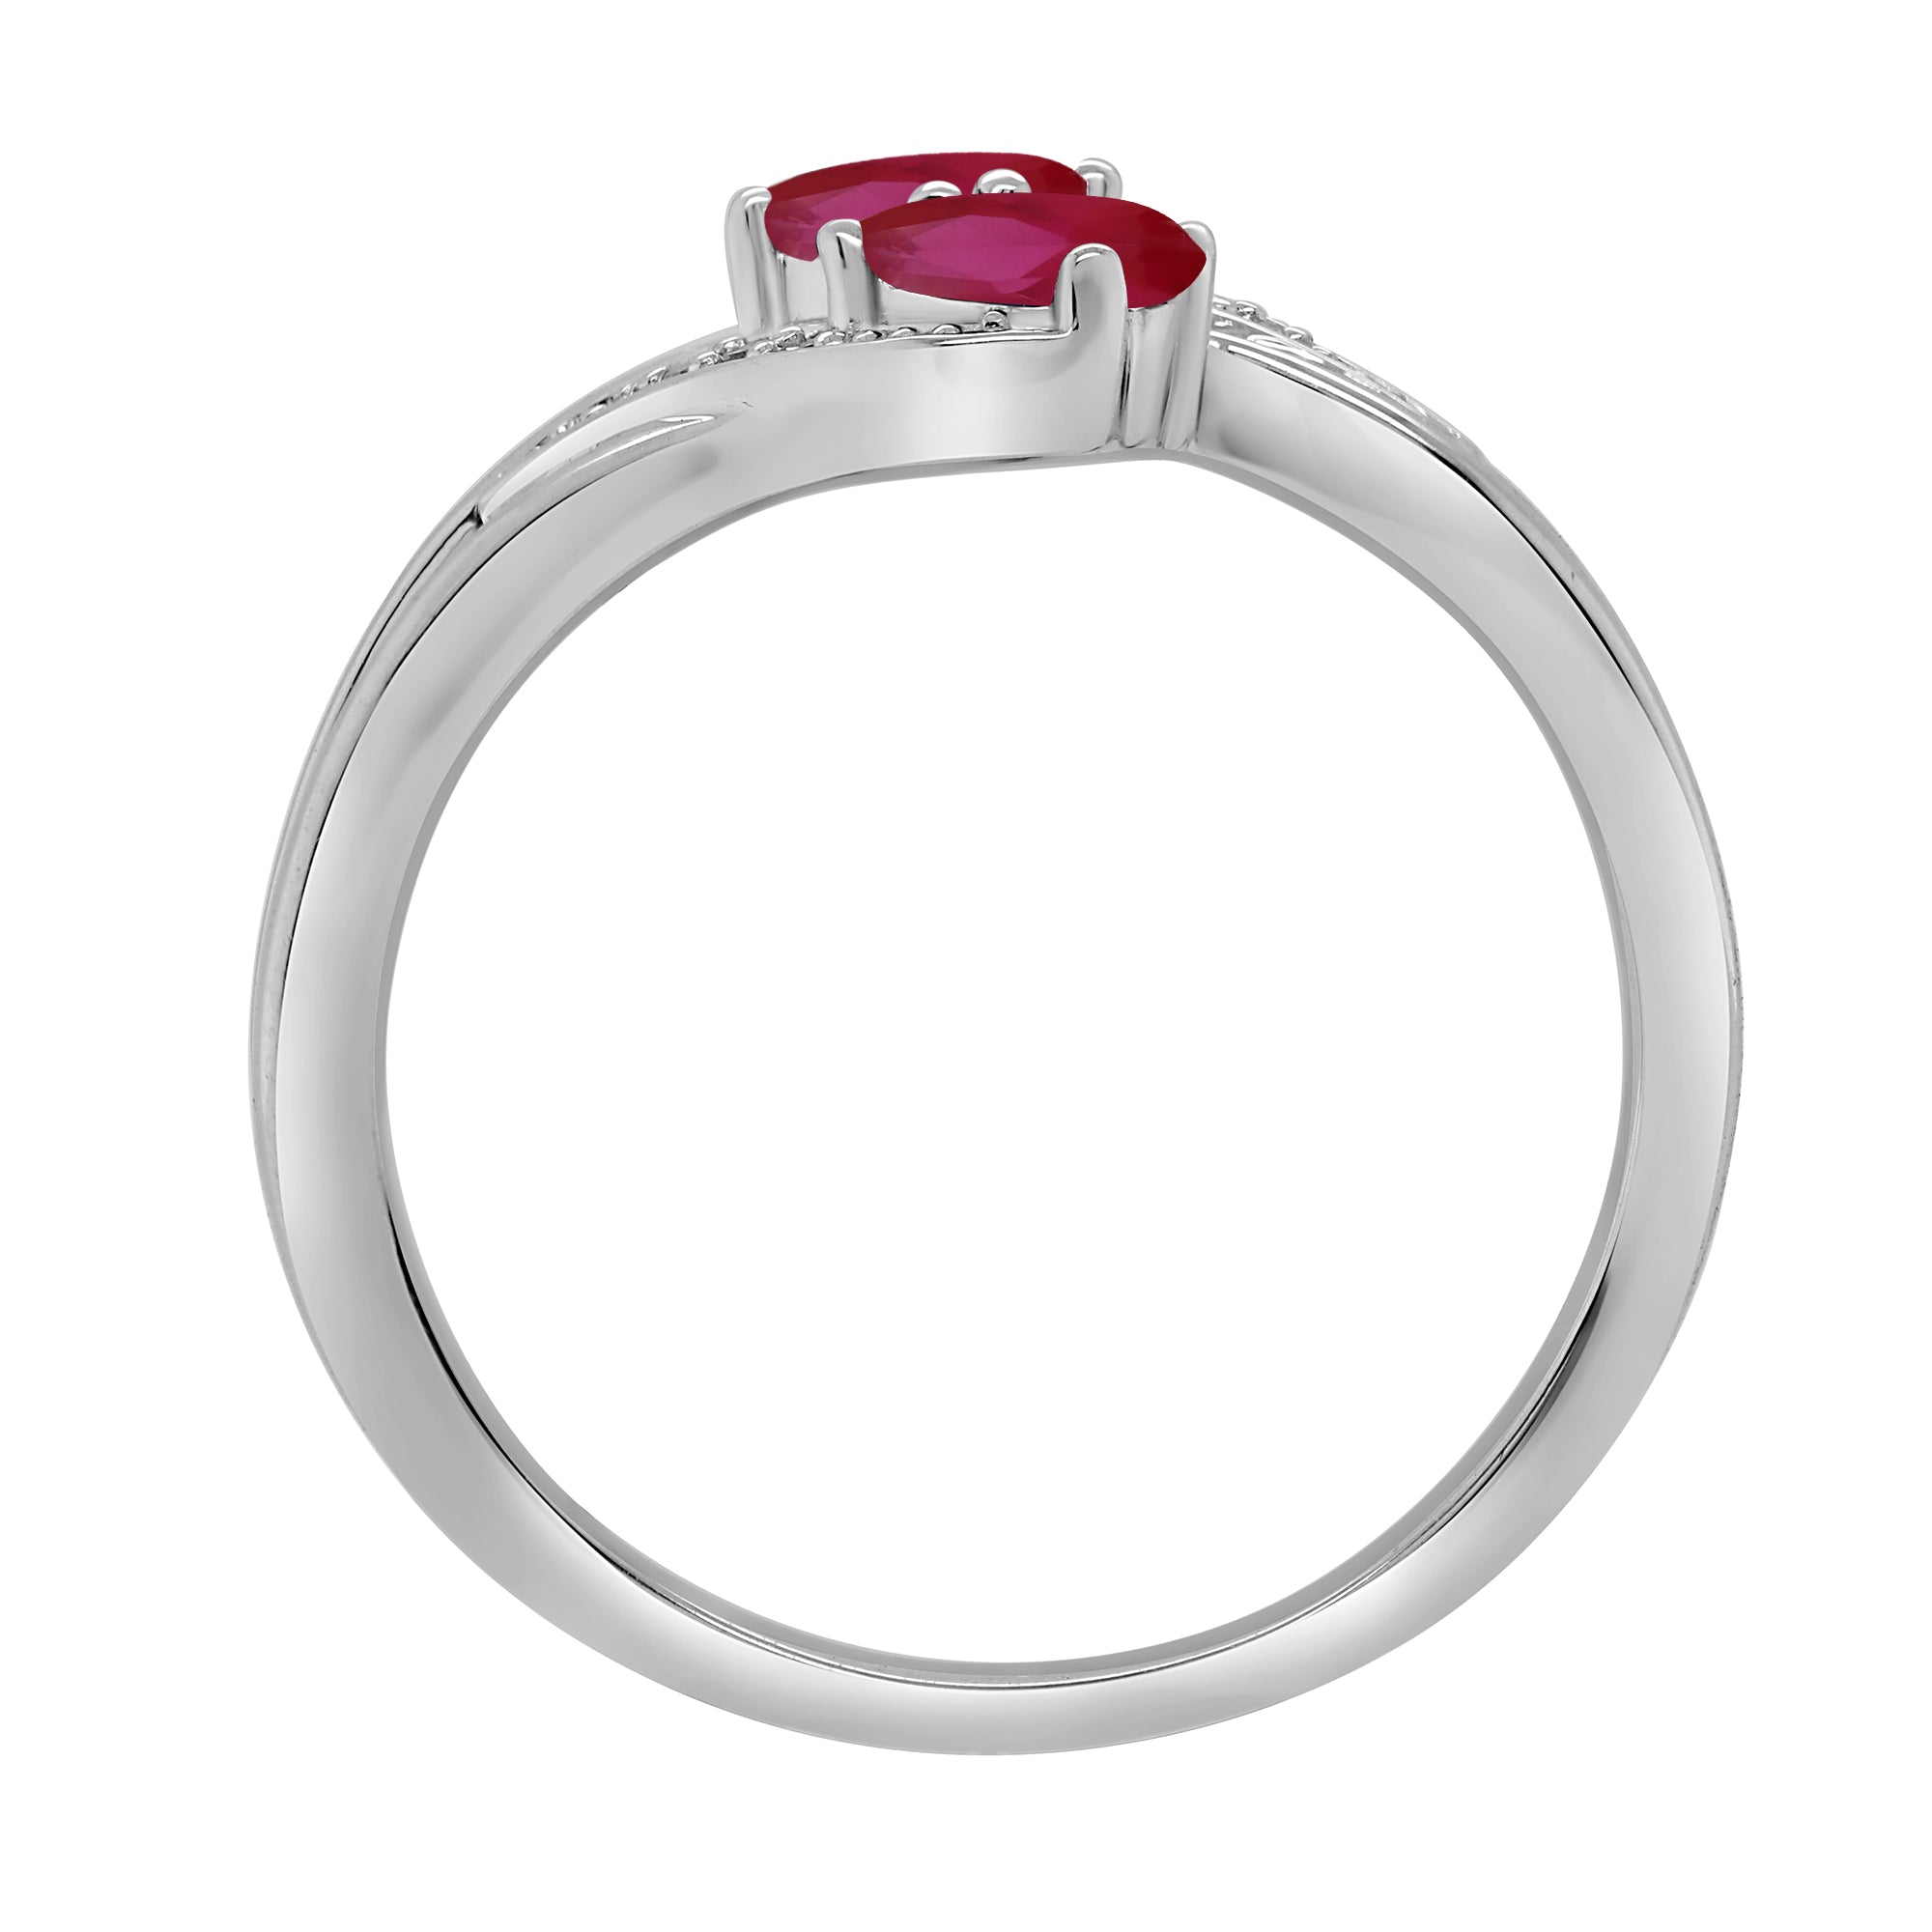 9ct white gold 5x3mm oval rubies & diamond cross over ring 0.02ct